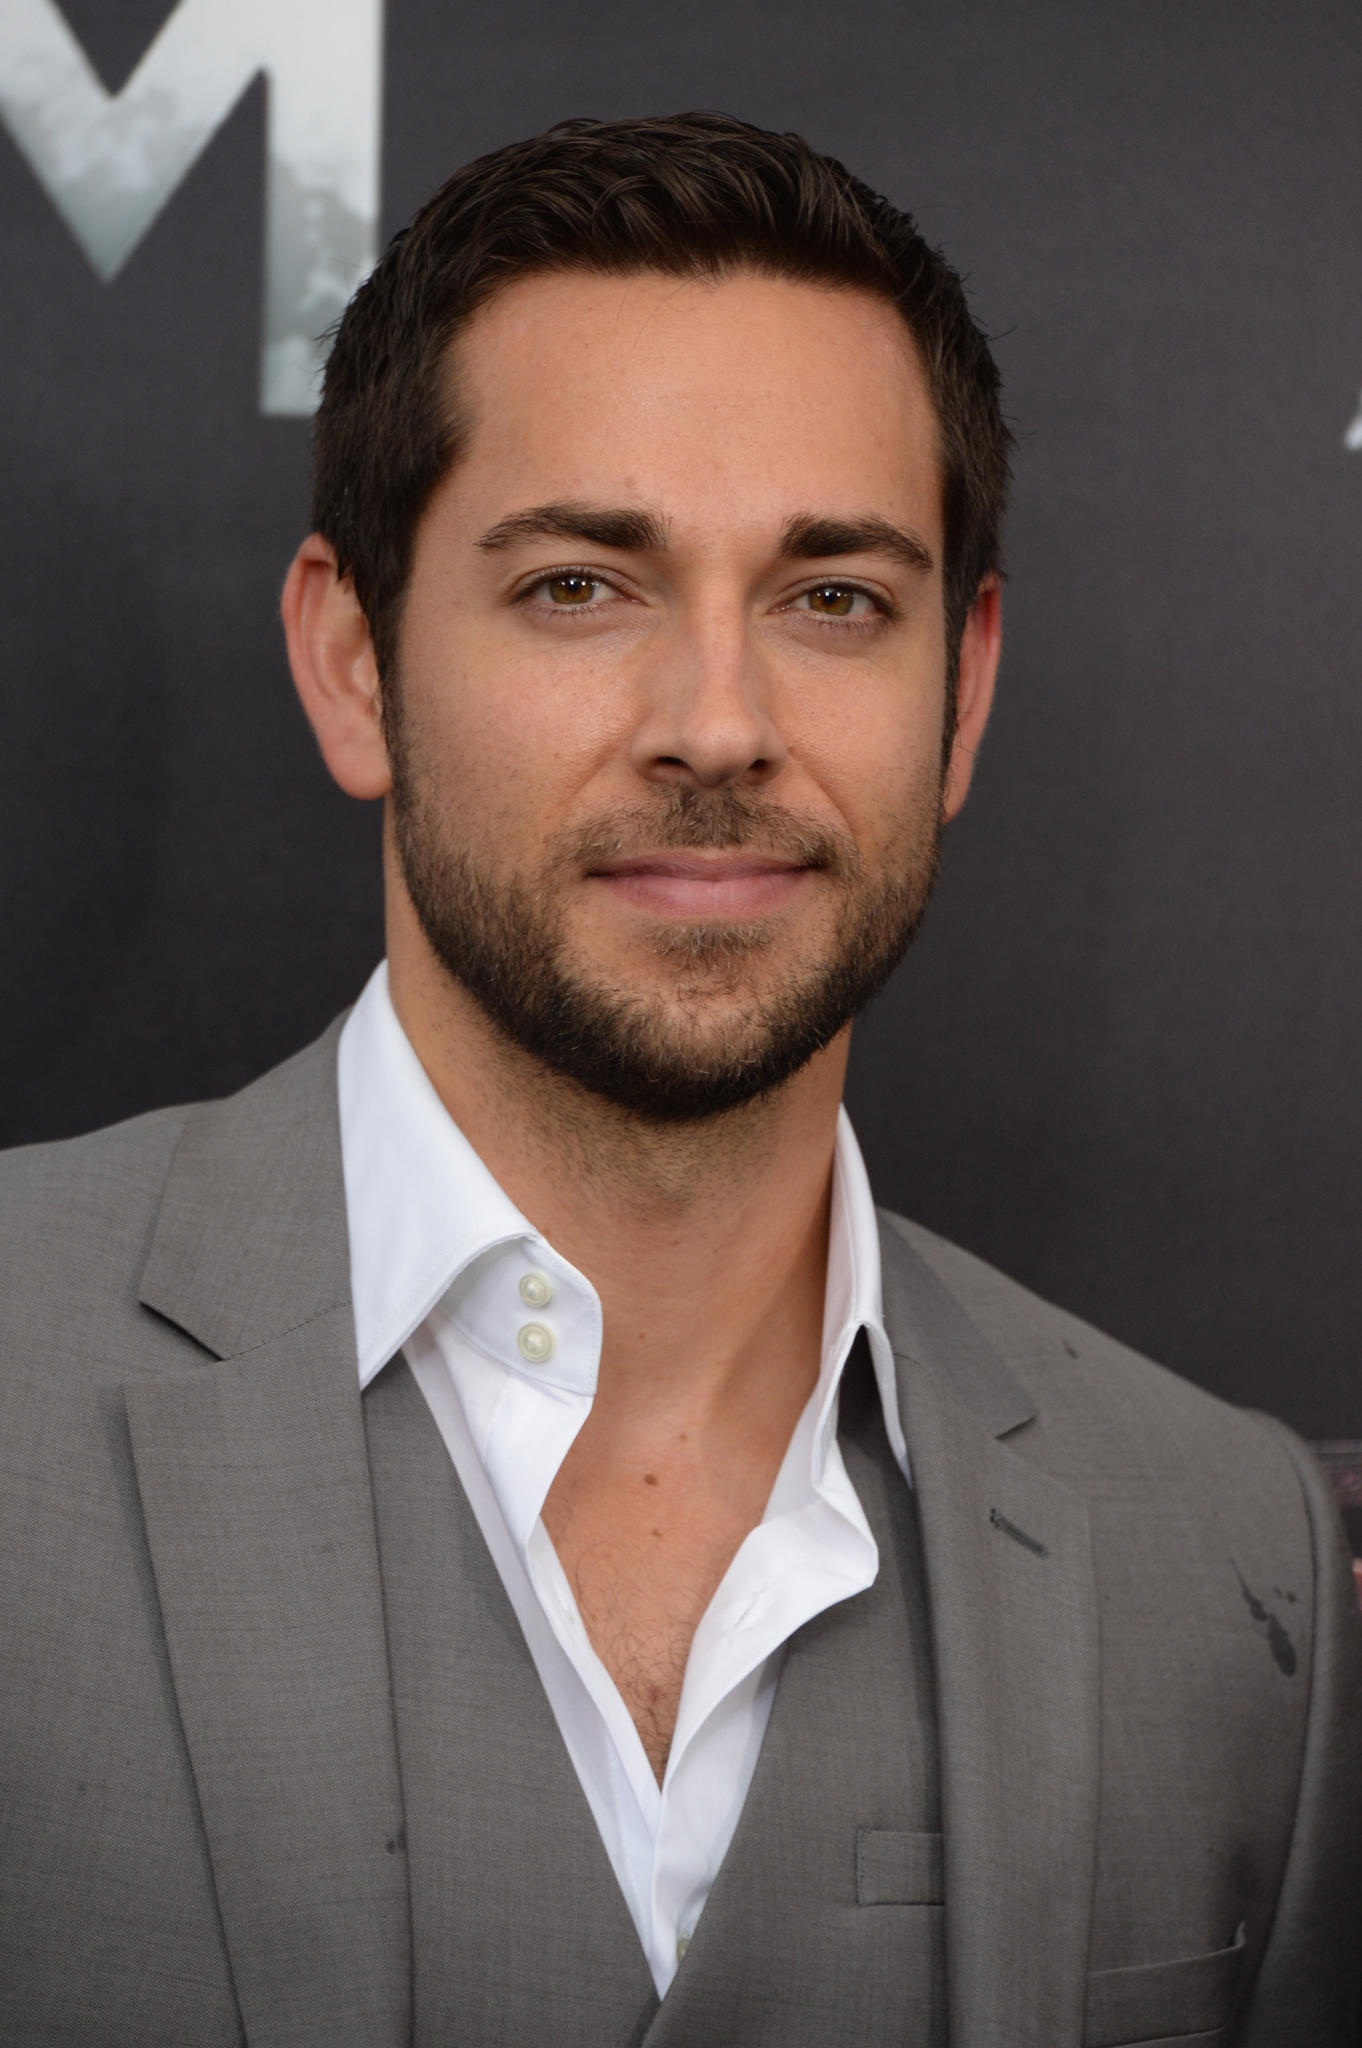 Zachary Levi at event of Zmogus is plieno (2013)